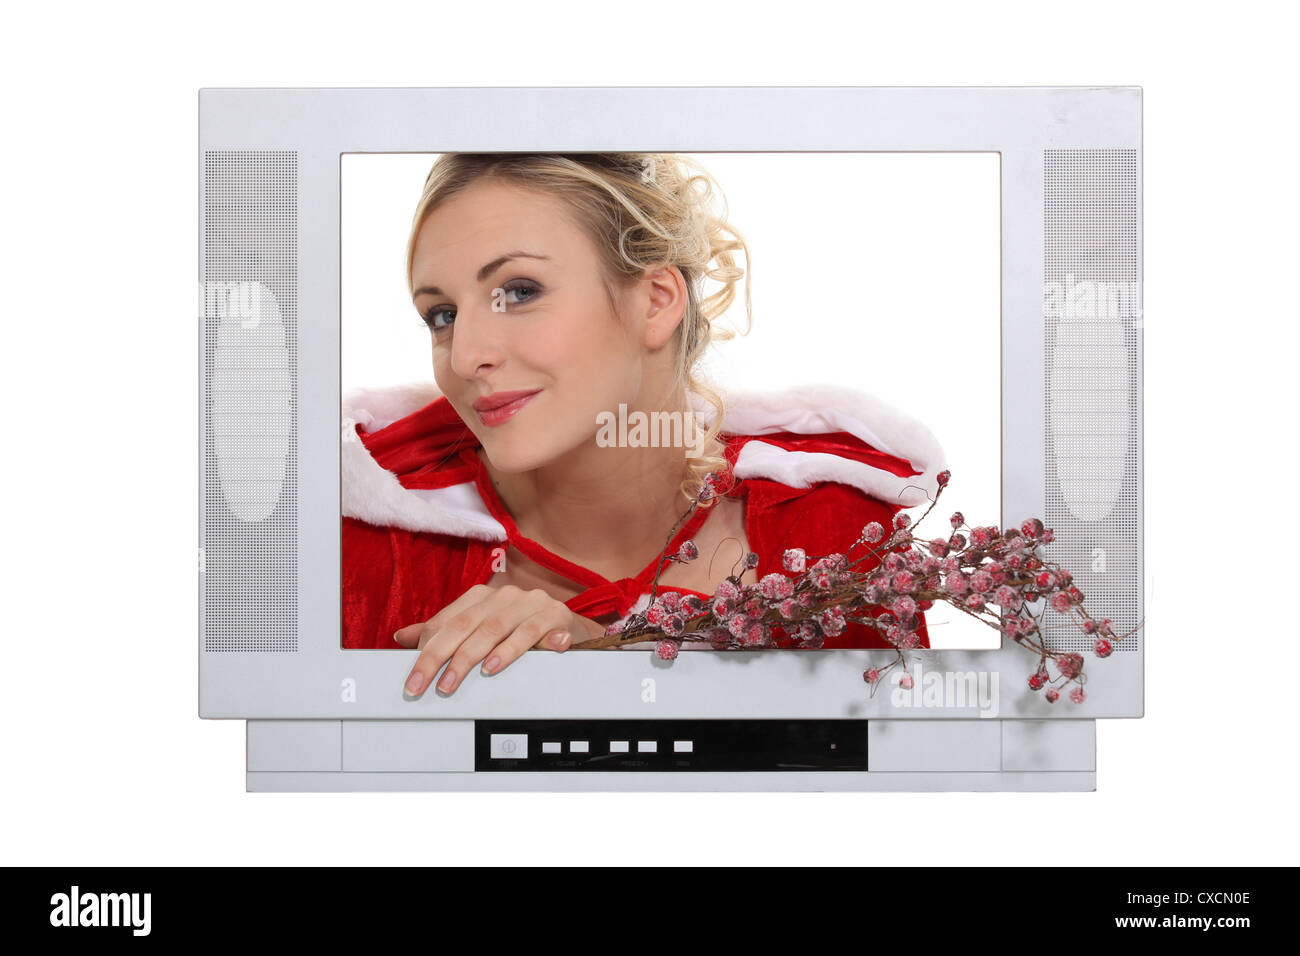 Woman dressed in festive outfit coming out of television Stock Photo